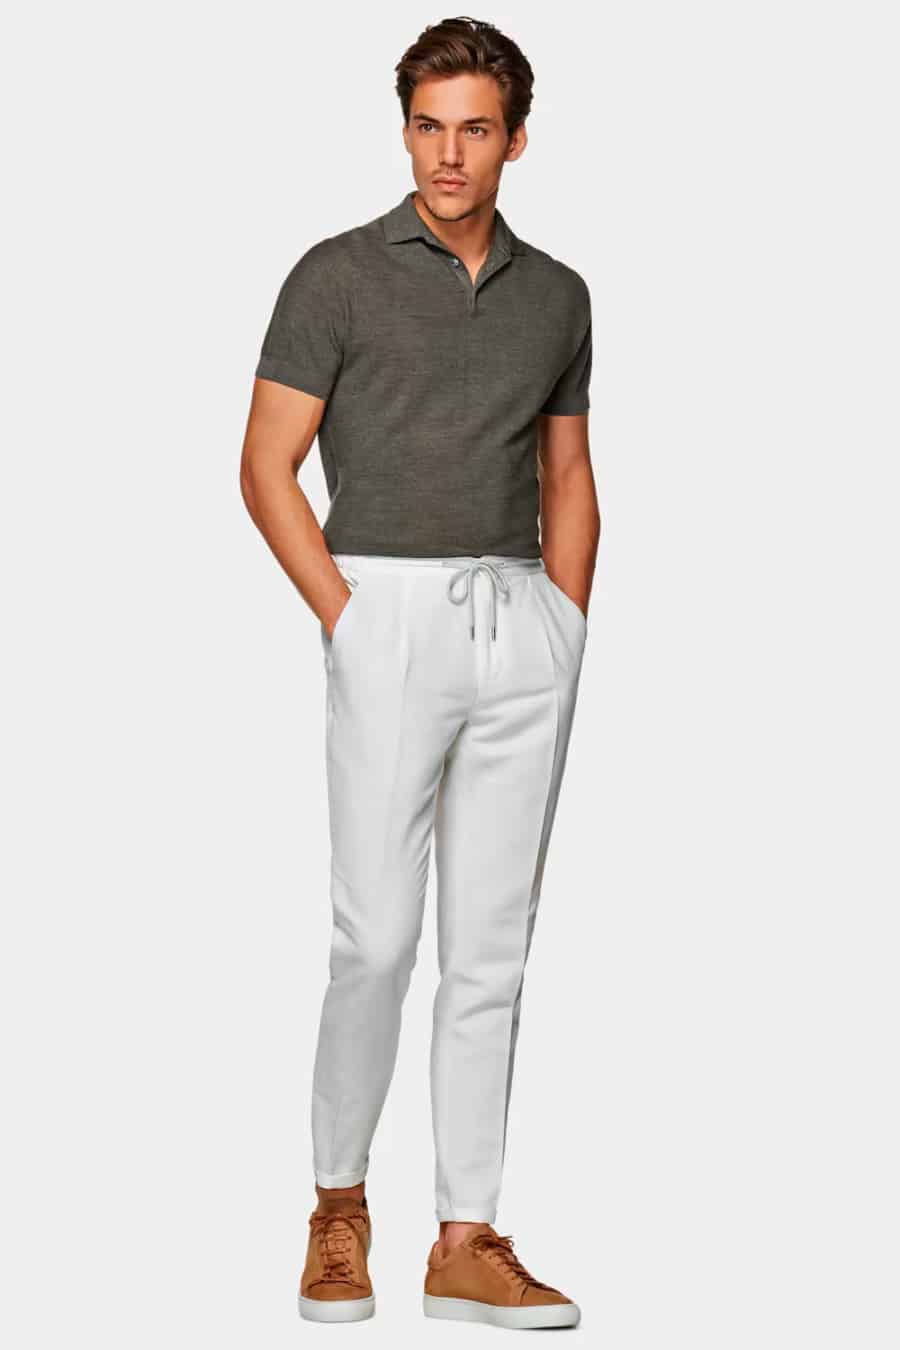 Men's white drawstring pants, tucked in merino polo shirt and brown sneakers outfit